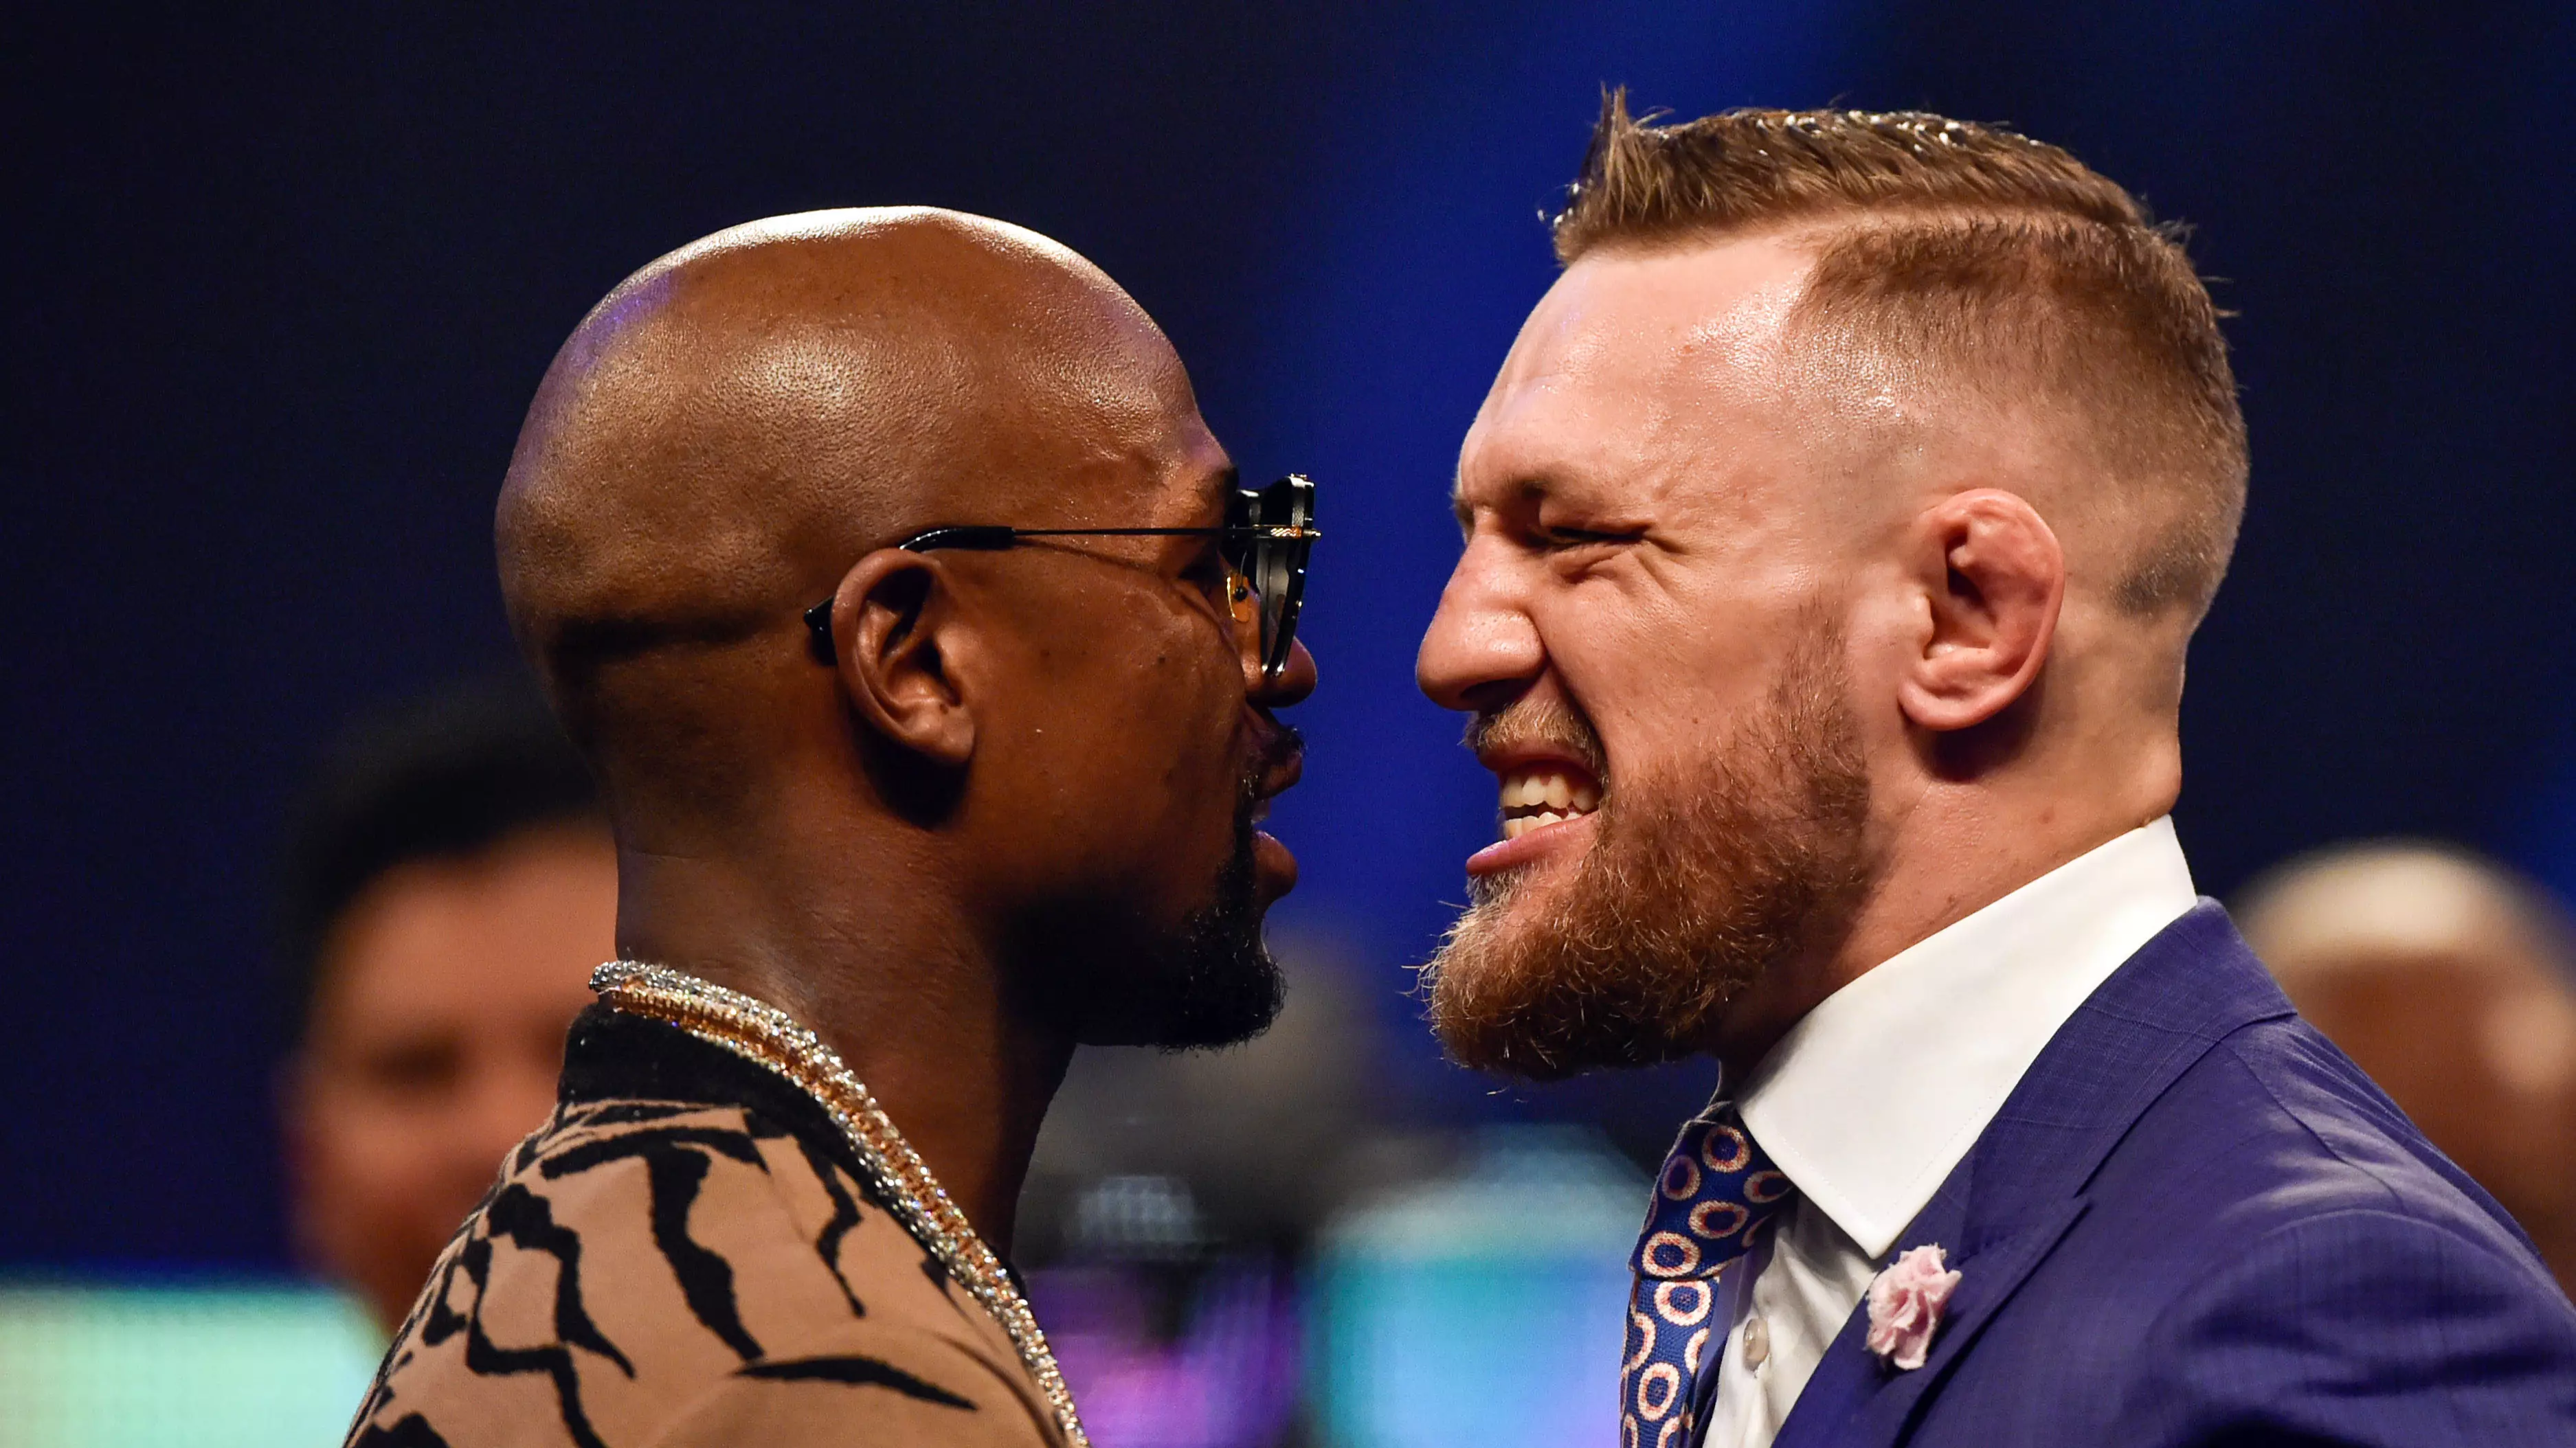 Social Media Reacts After Floyd Mayweather Calls Conor McGregor A F****t 